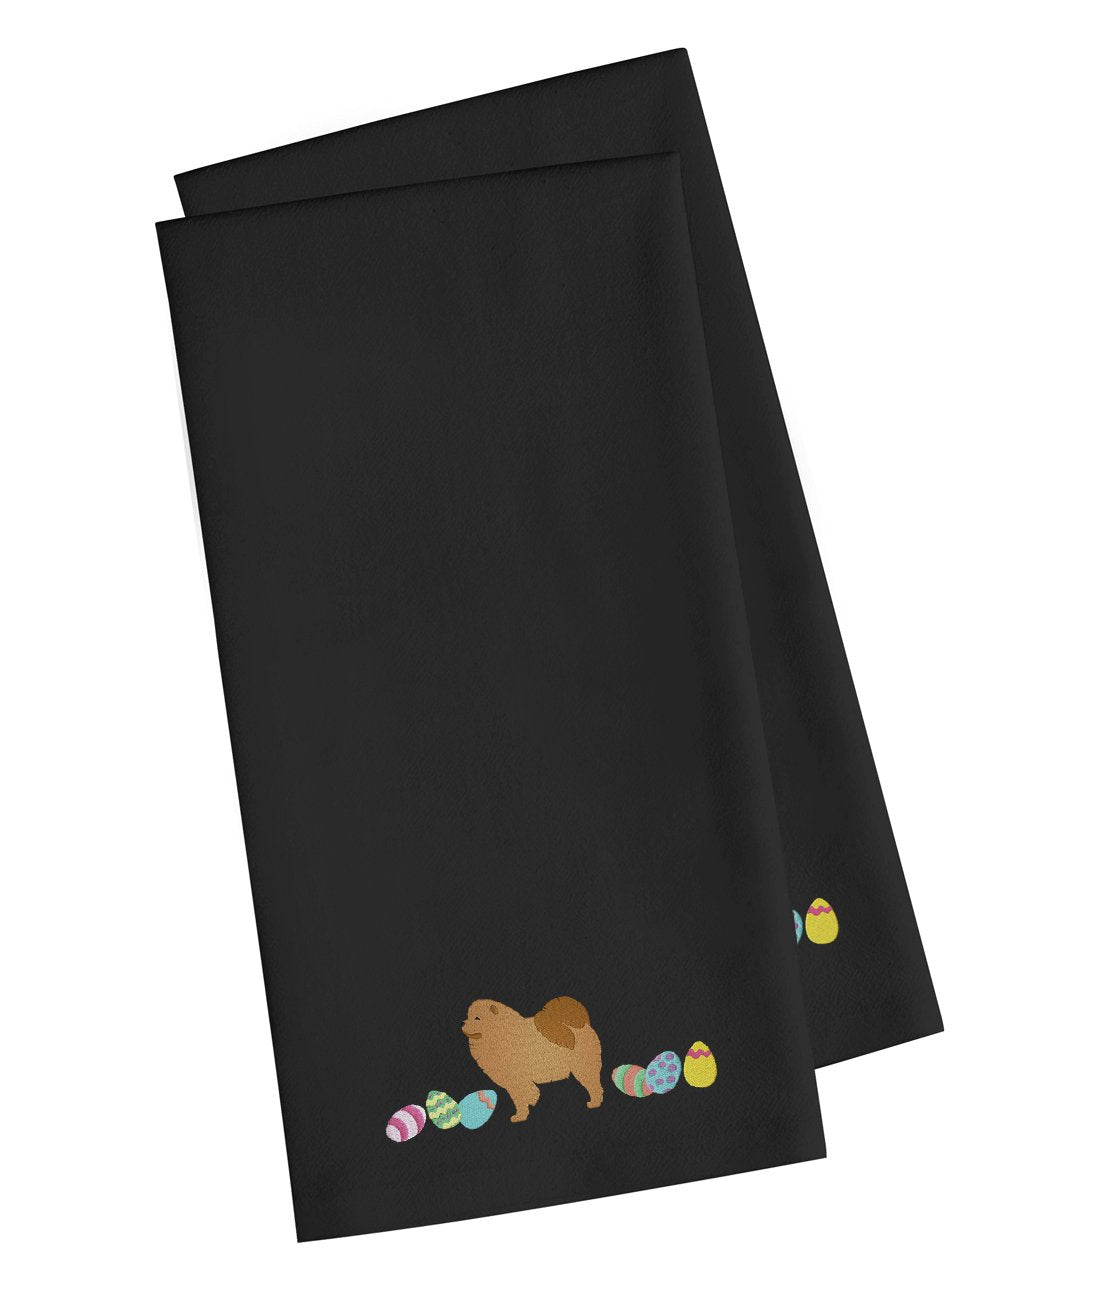 Chow Chow Easter Black Embroidered Kitchen Towel Set of 2 CK1626BKTWE by Caroline's Treasures